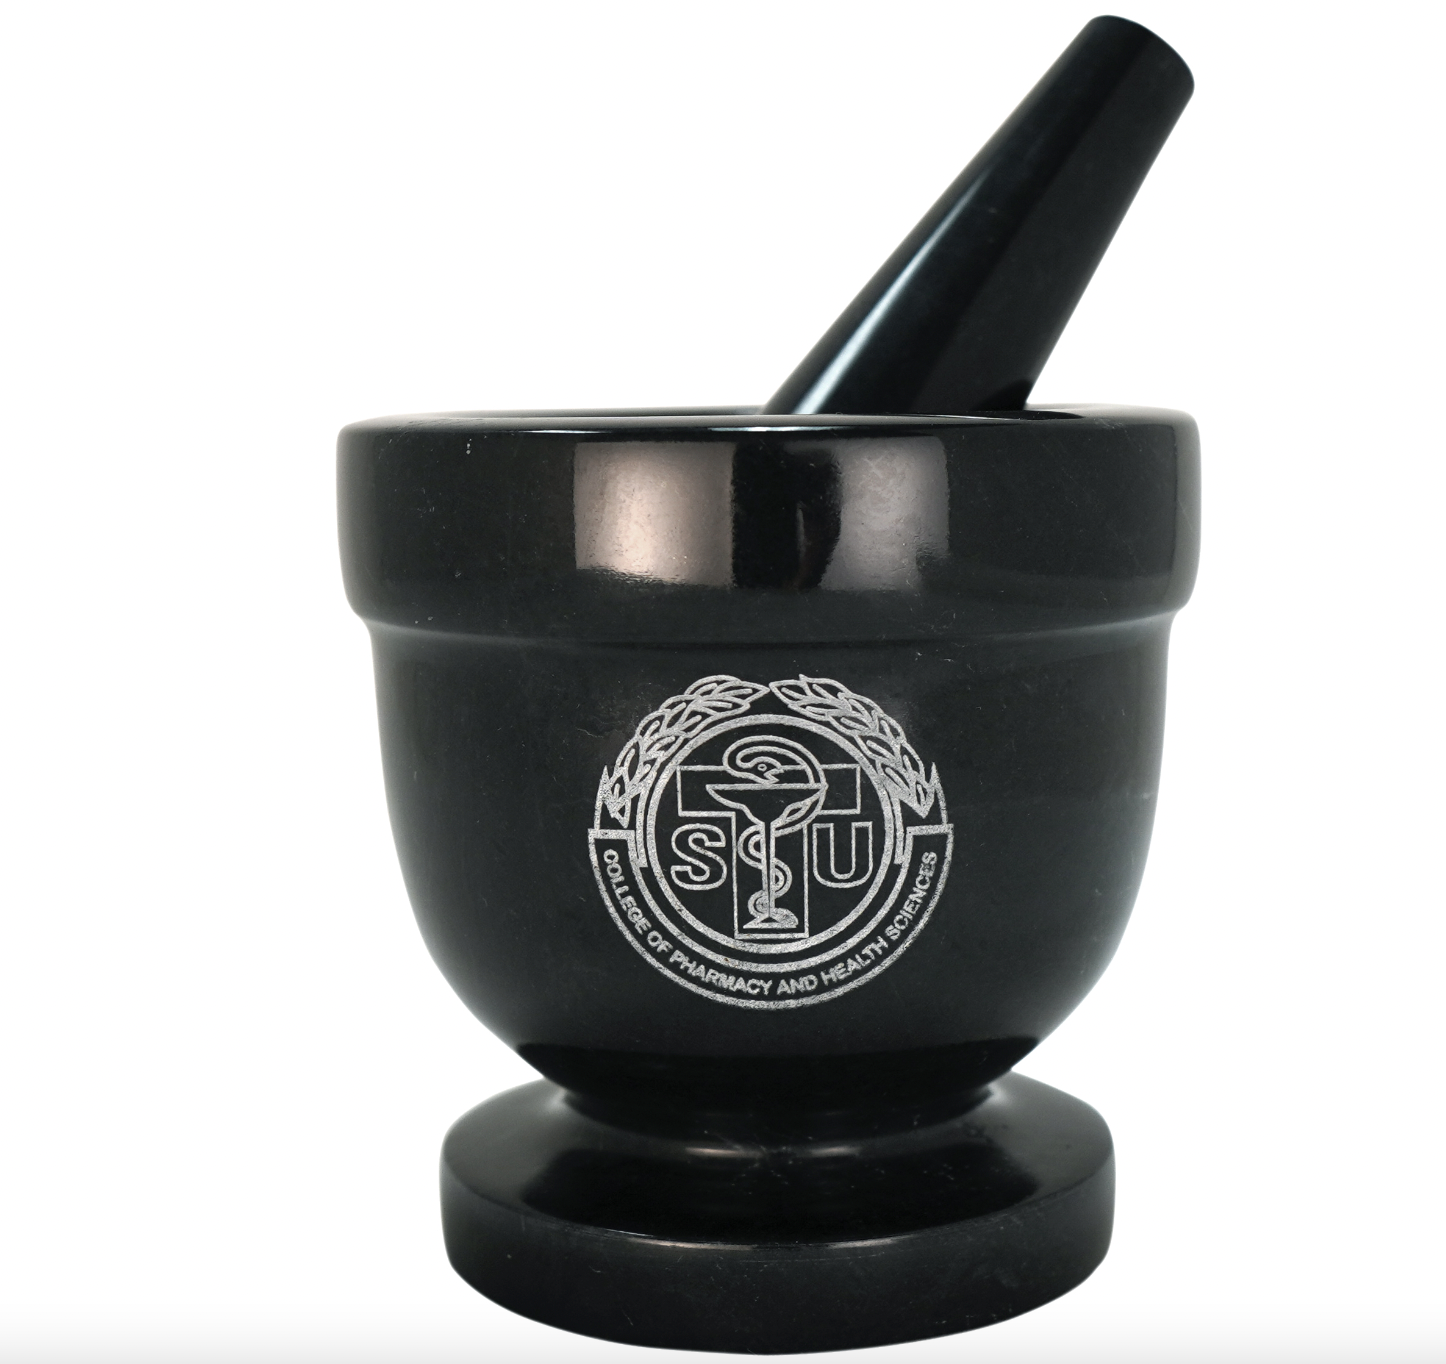 Engraved Mortar and Pestle